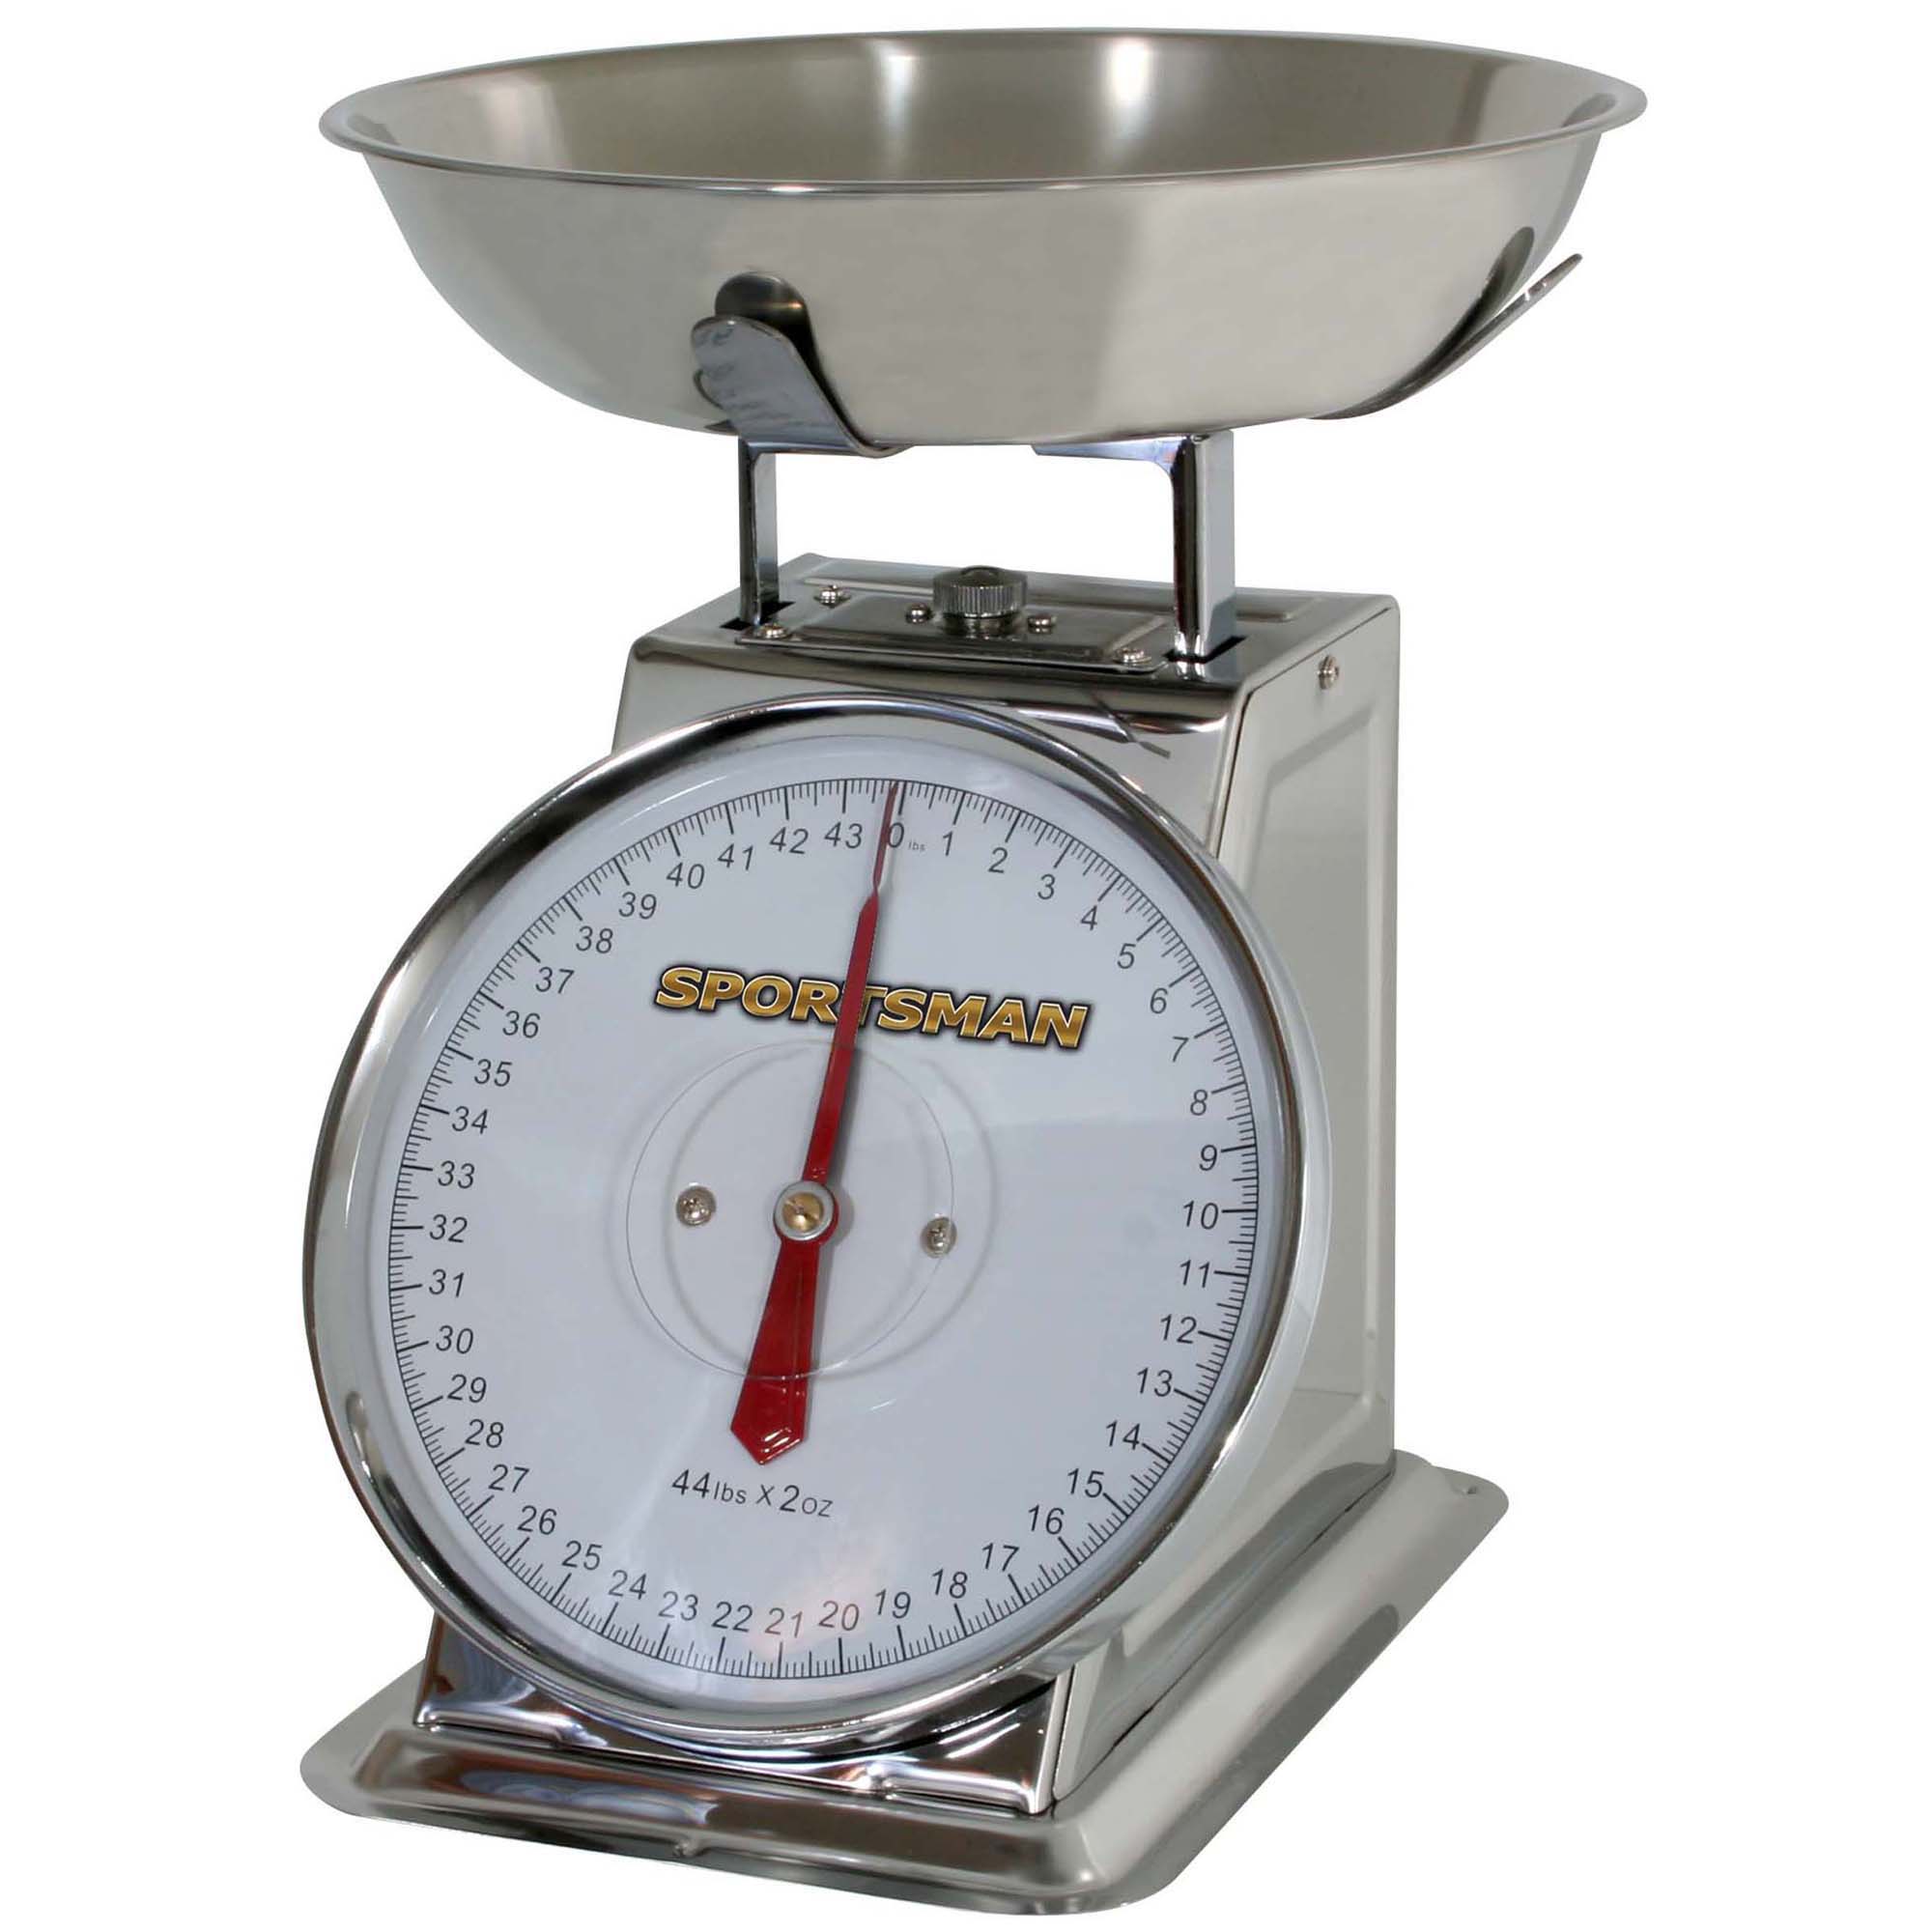 Sportsman Series 44 Lb Stainless Steel Dial Scale